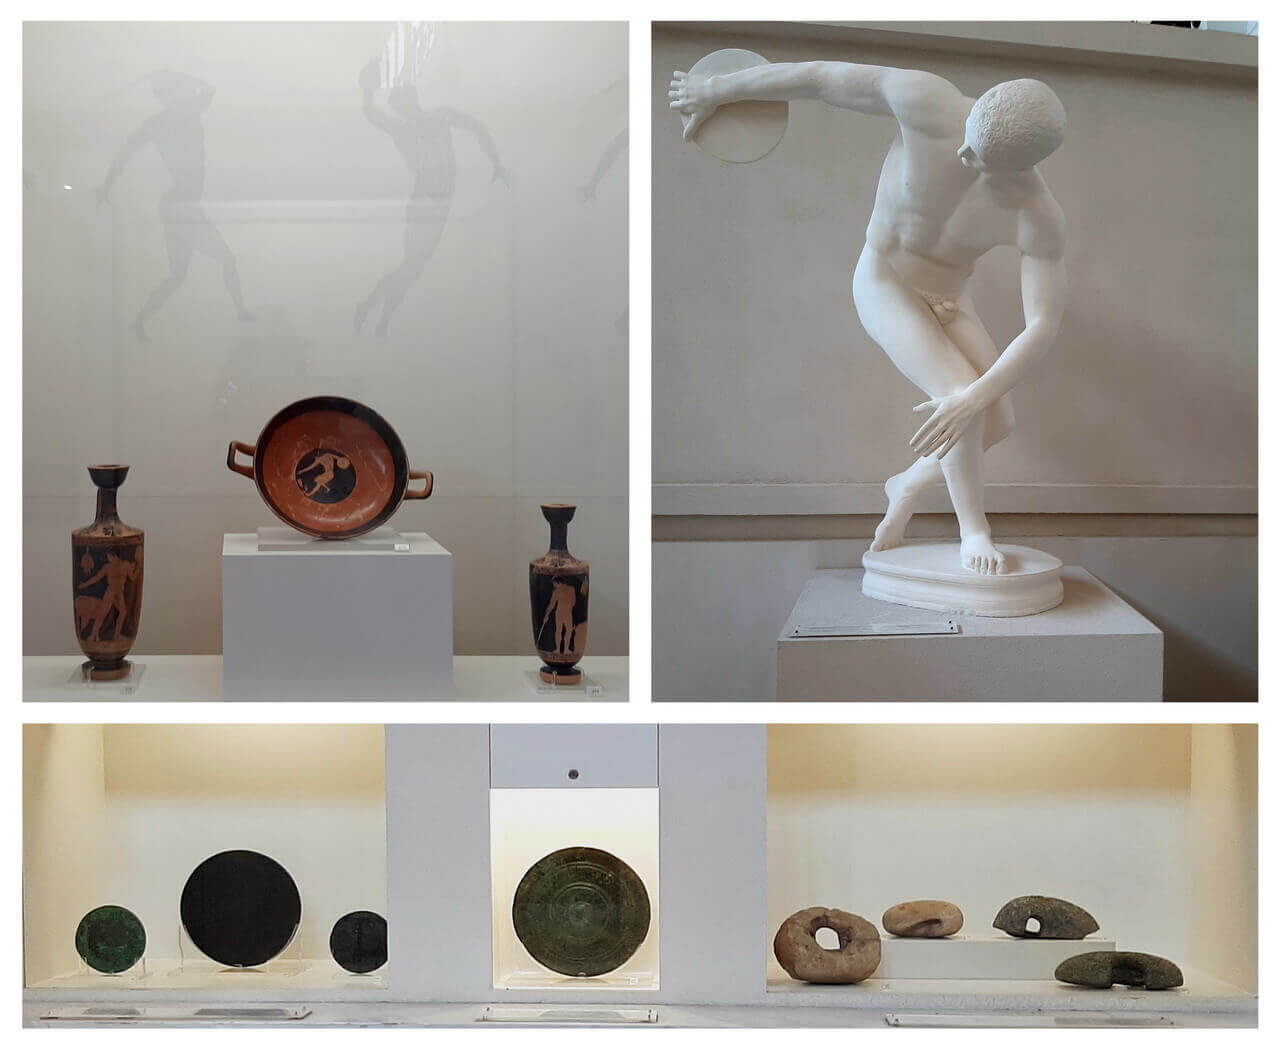 Discus, the Museum of the history of the Olympic Games